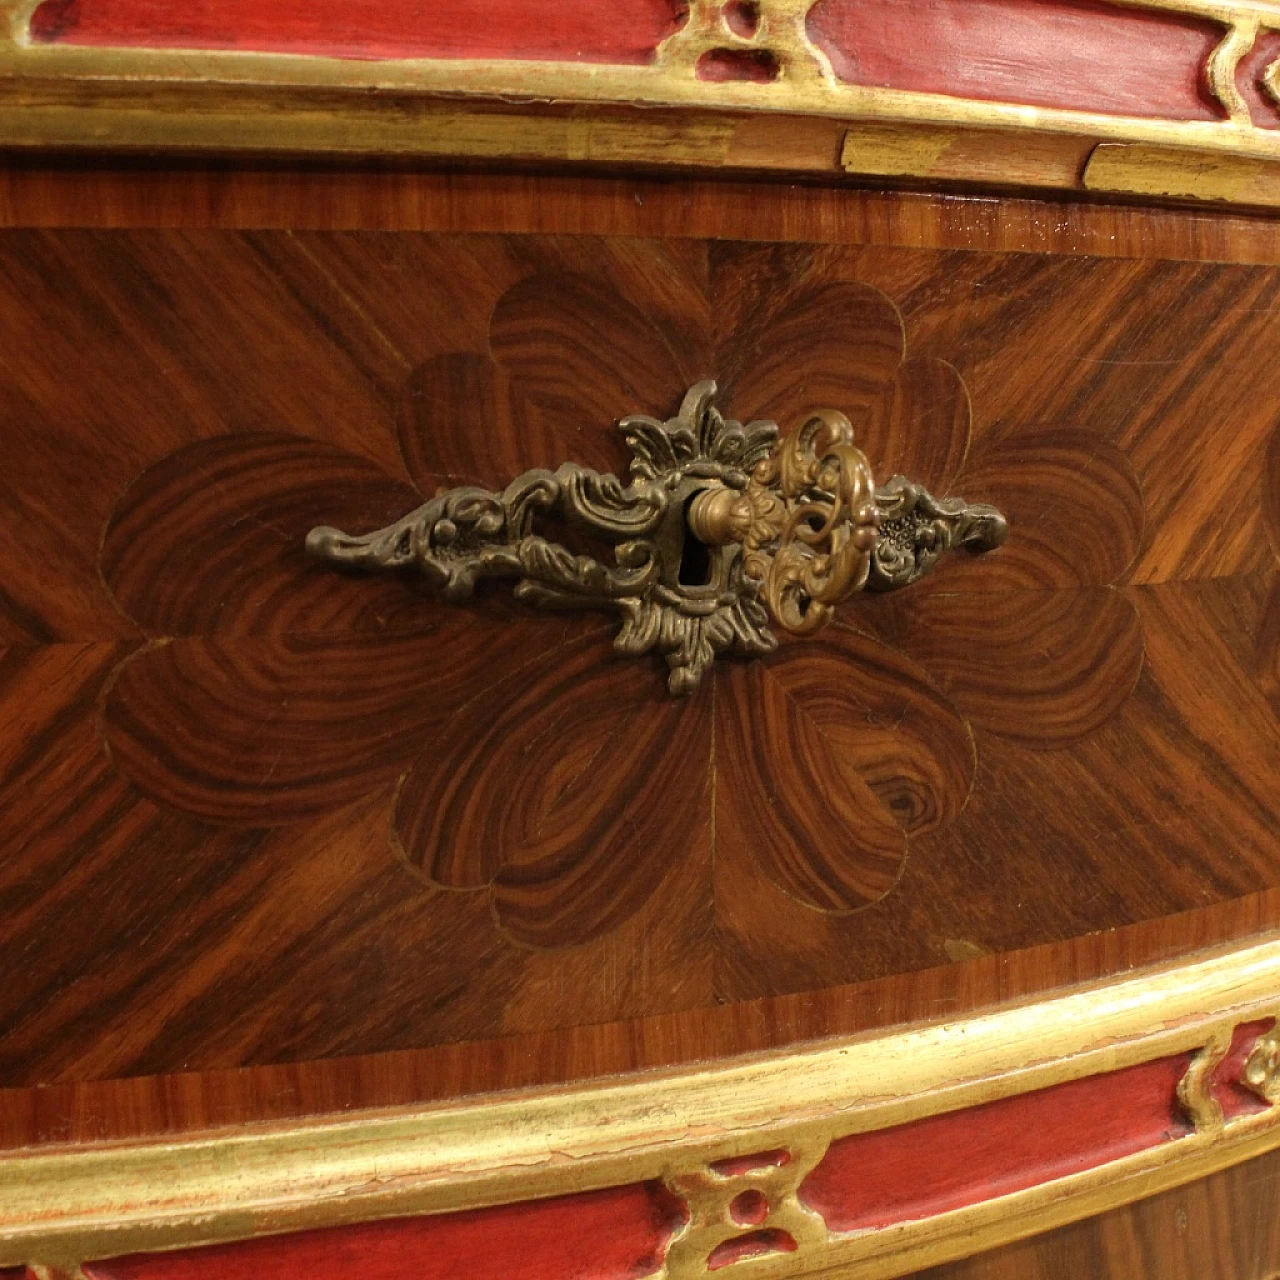 Genoese inlaid, lacquered and gilded wood dresser 15